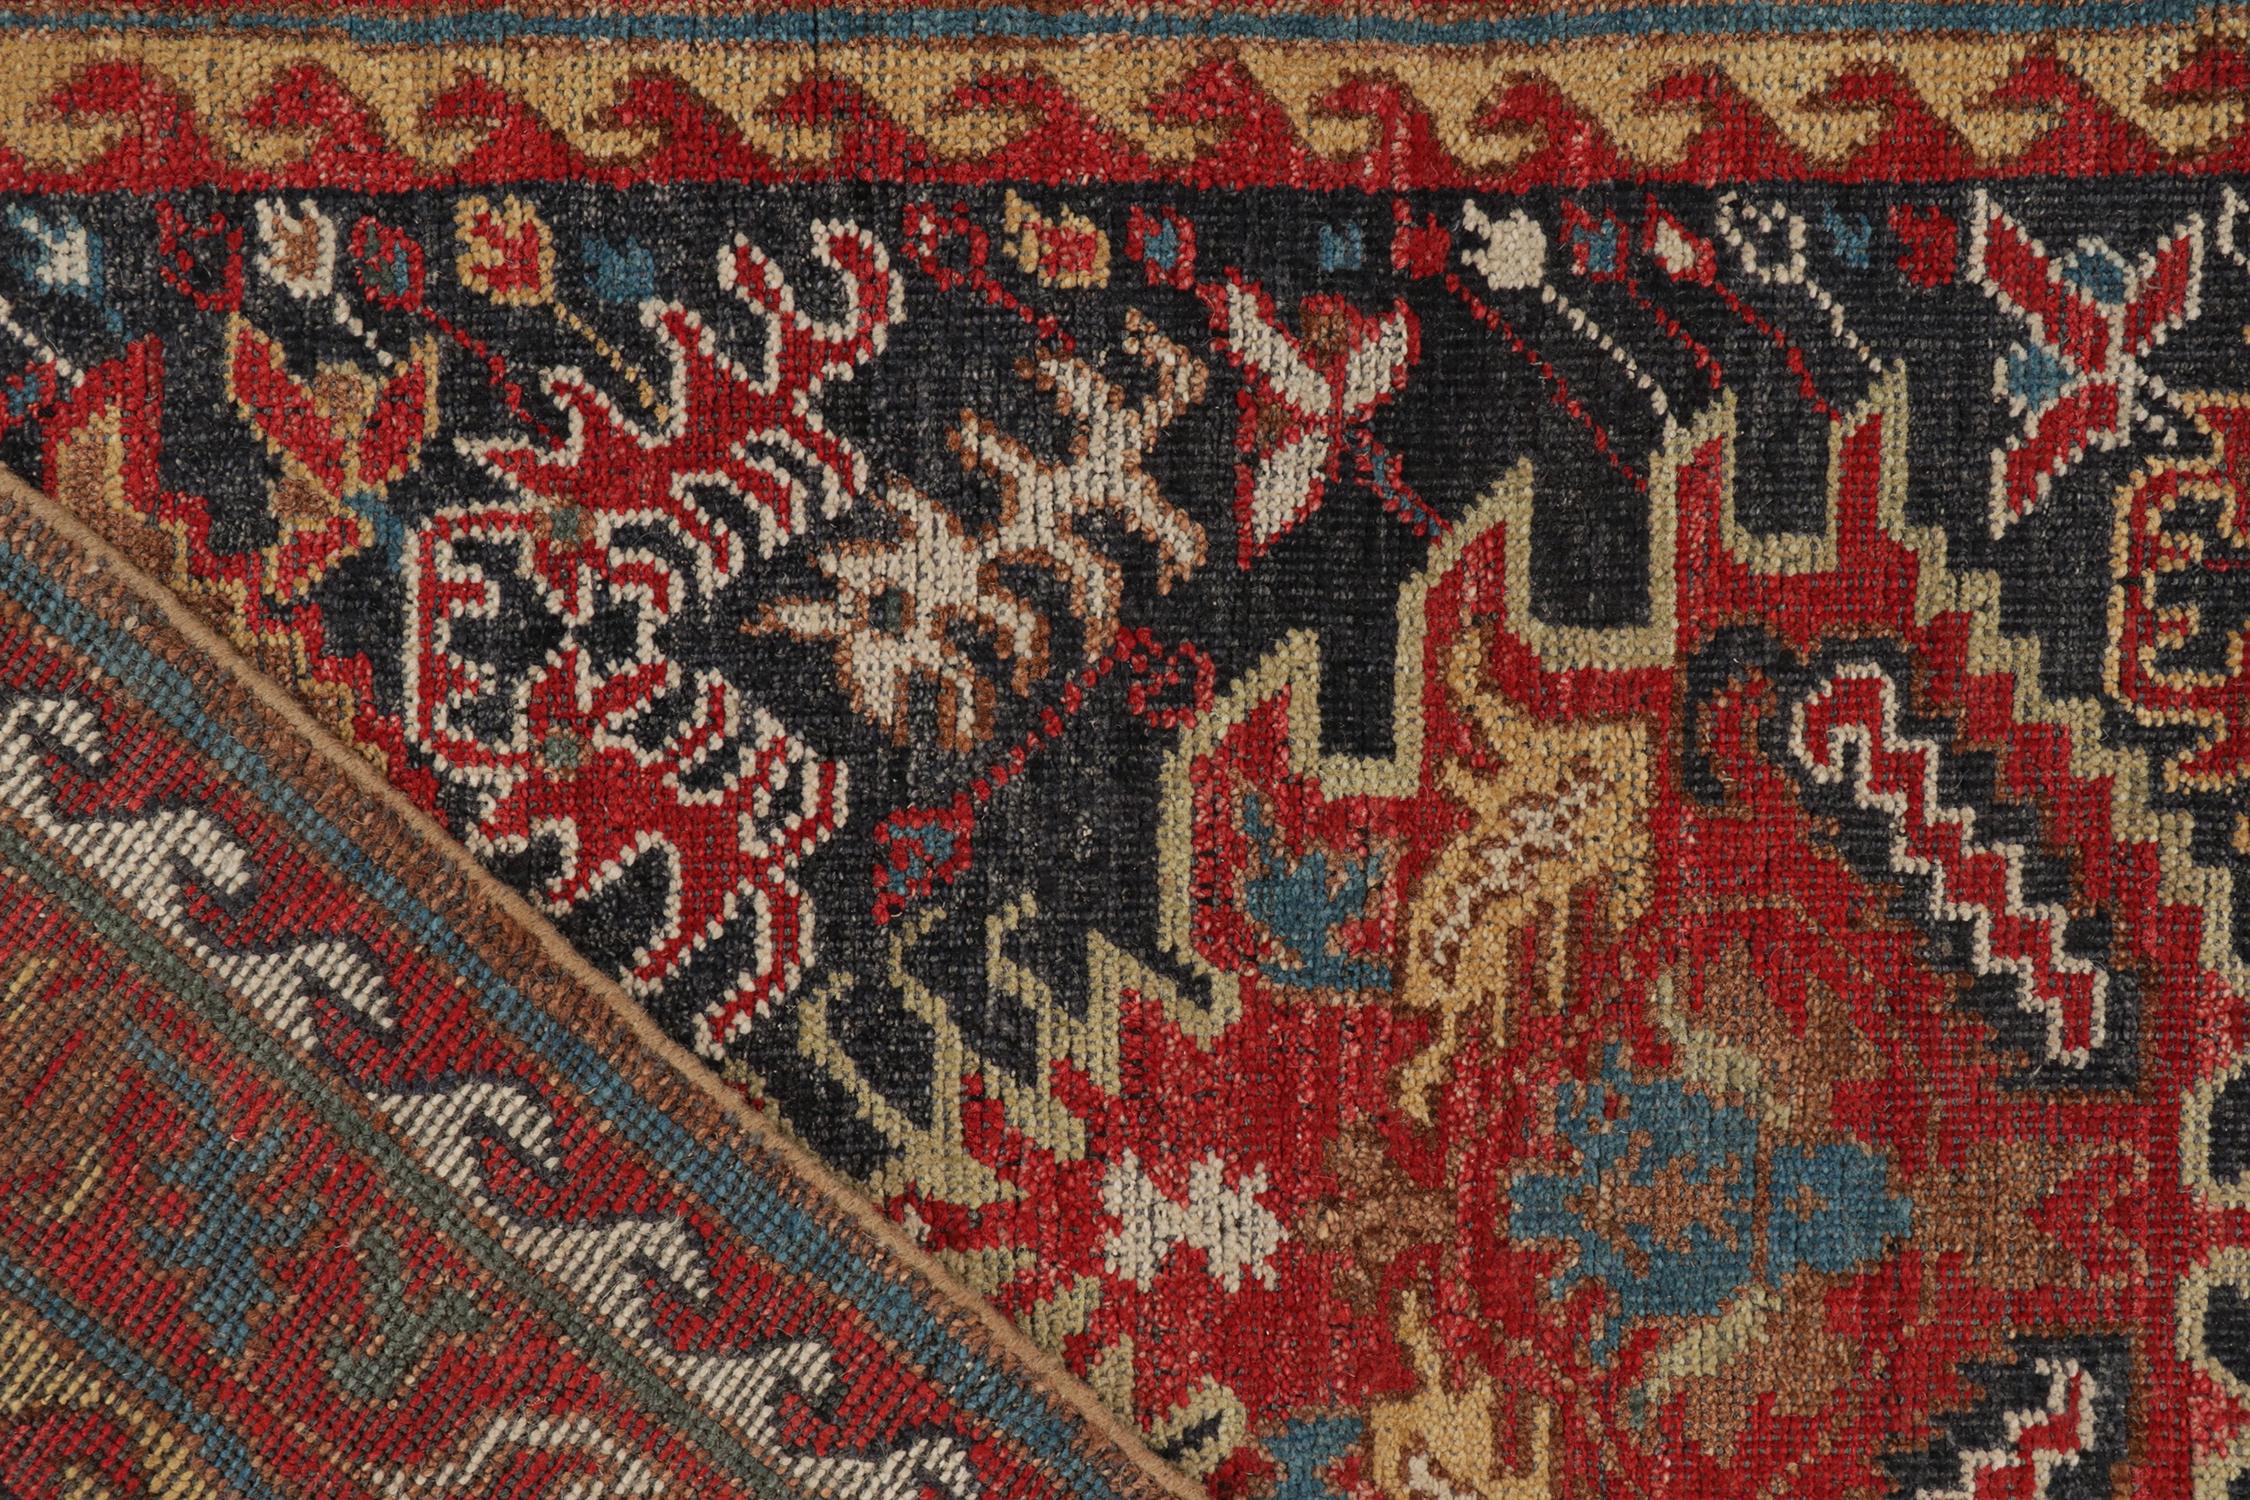 Wool Rug & Kilim’s Tribal style runner in Red, Brown and Blue Patterns For Sale